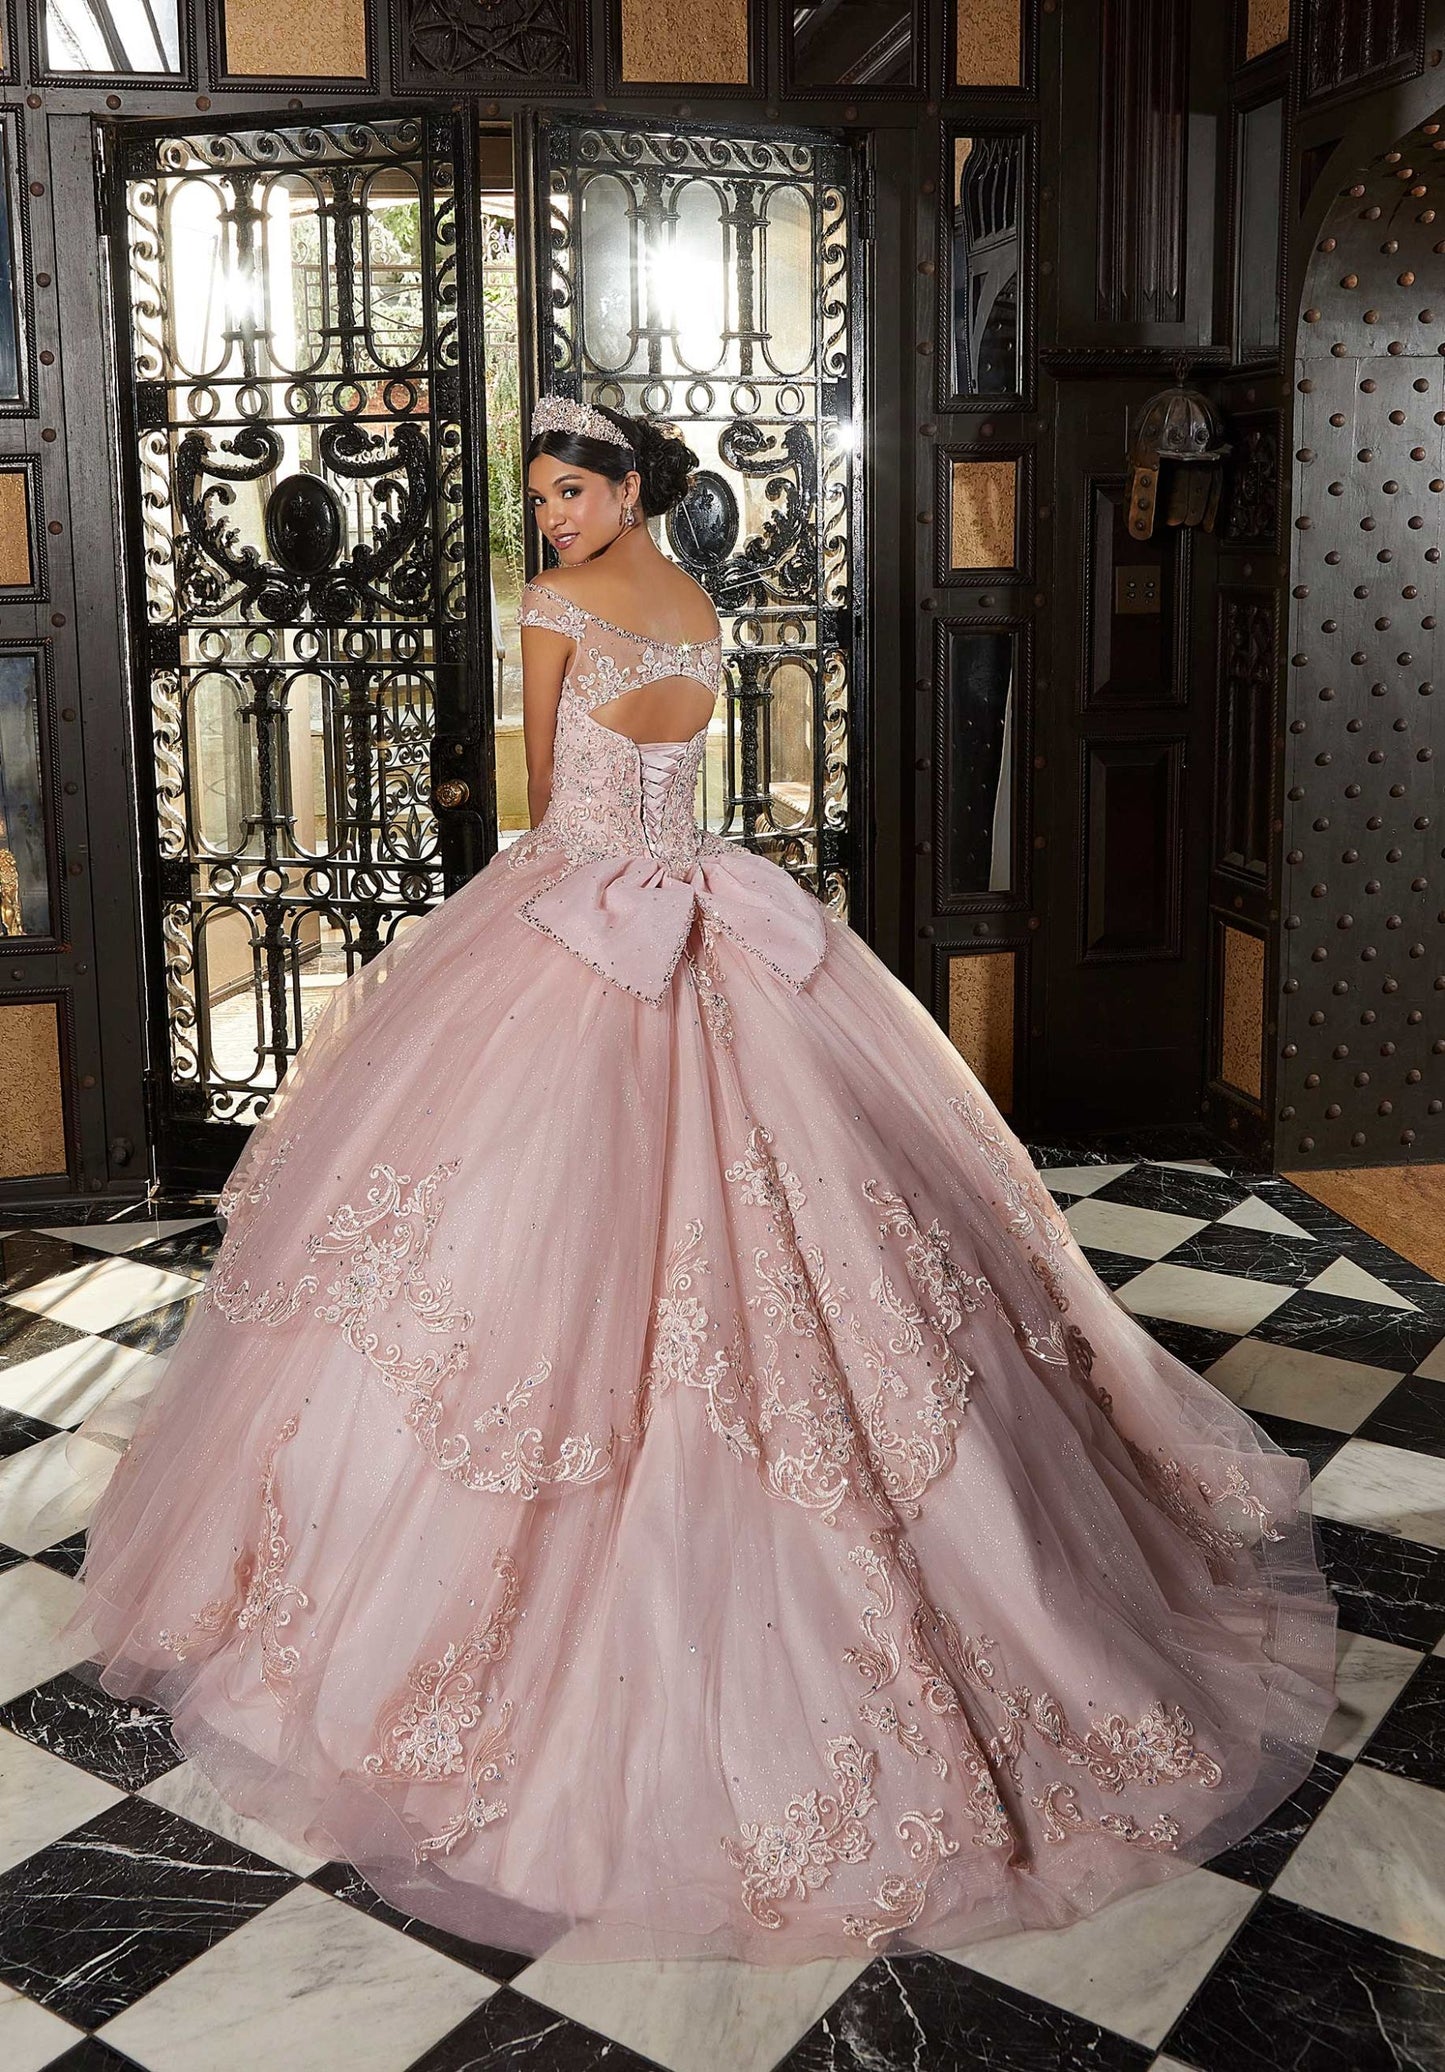 Sparkle Net Quinceañera Dress with Jeweled Edging #89340